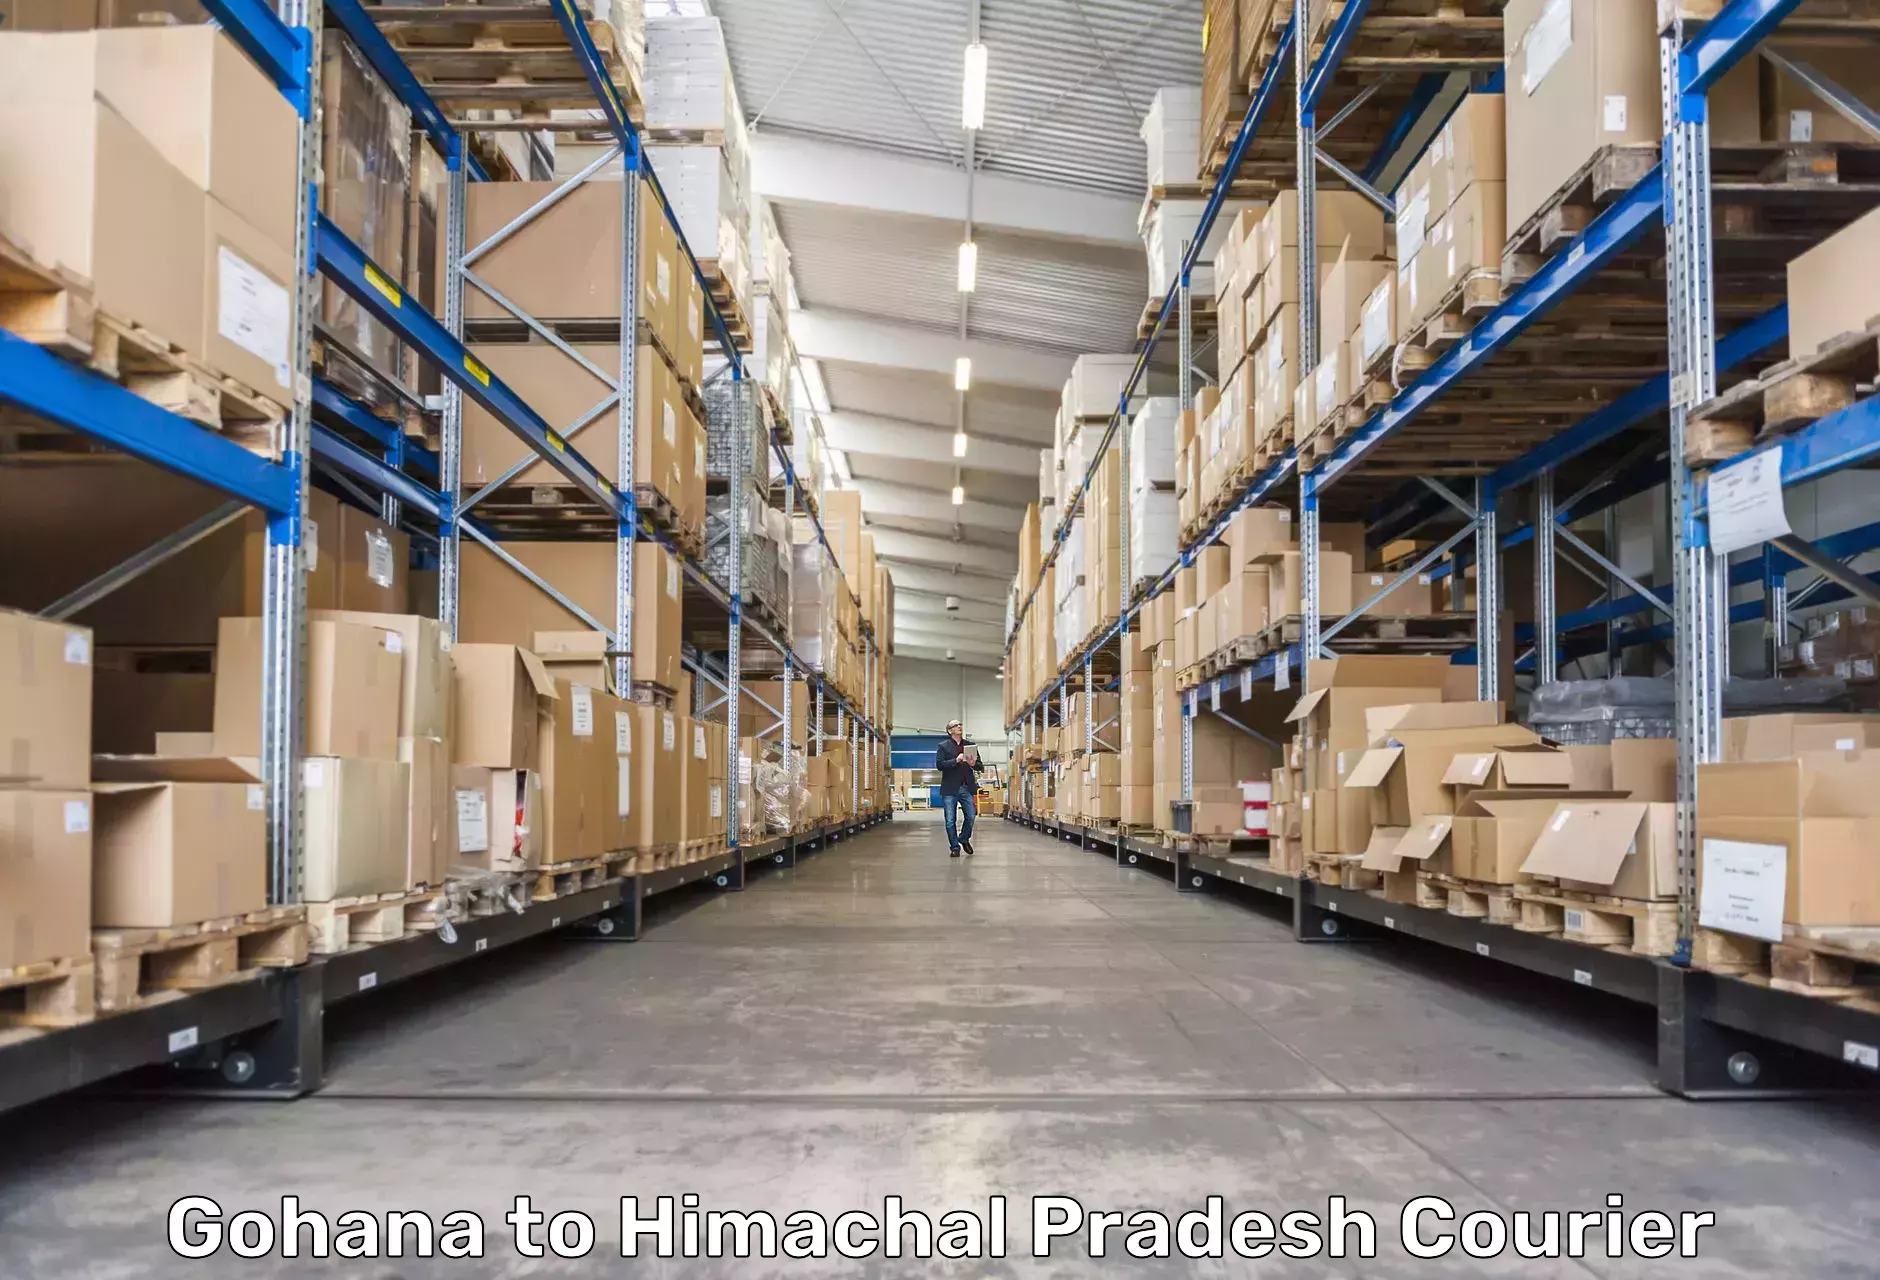 Sustainable shipping practices Gohana to Himachal Pradesh